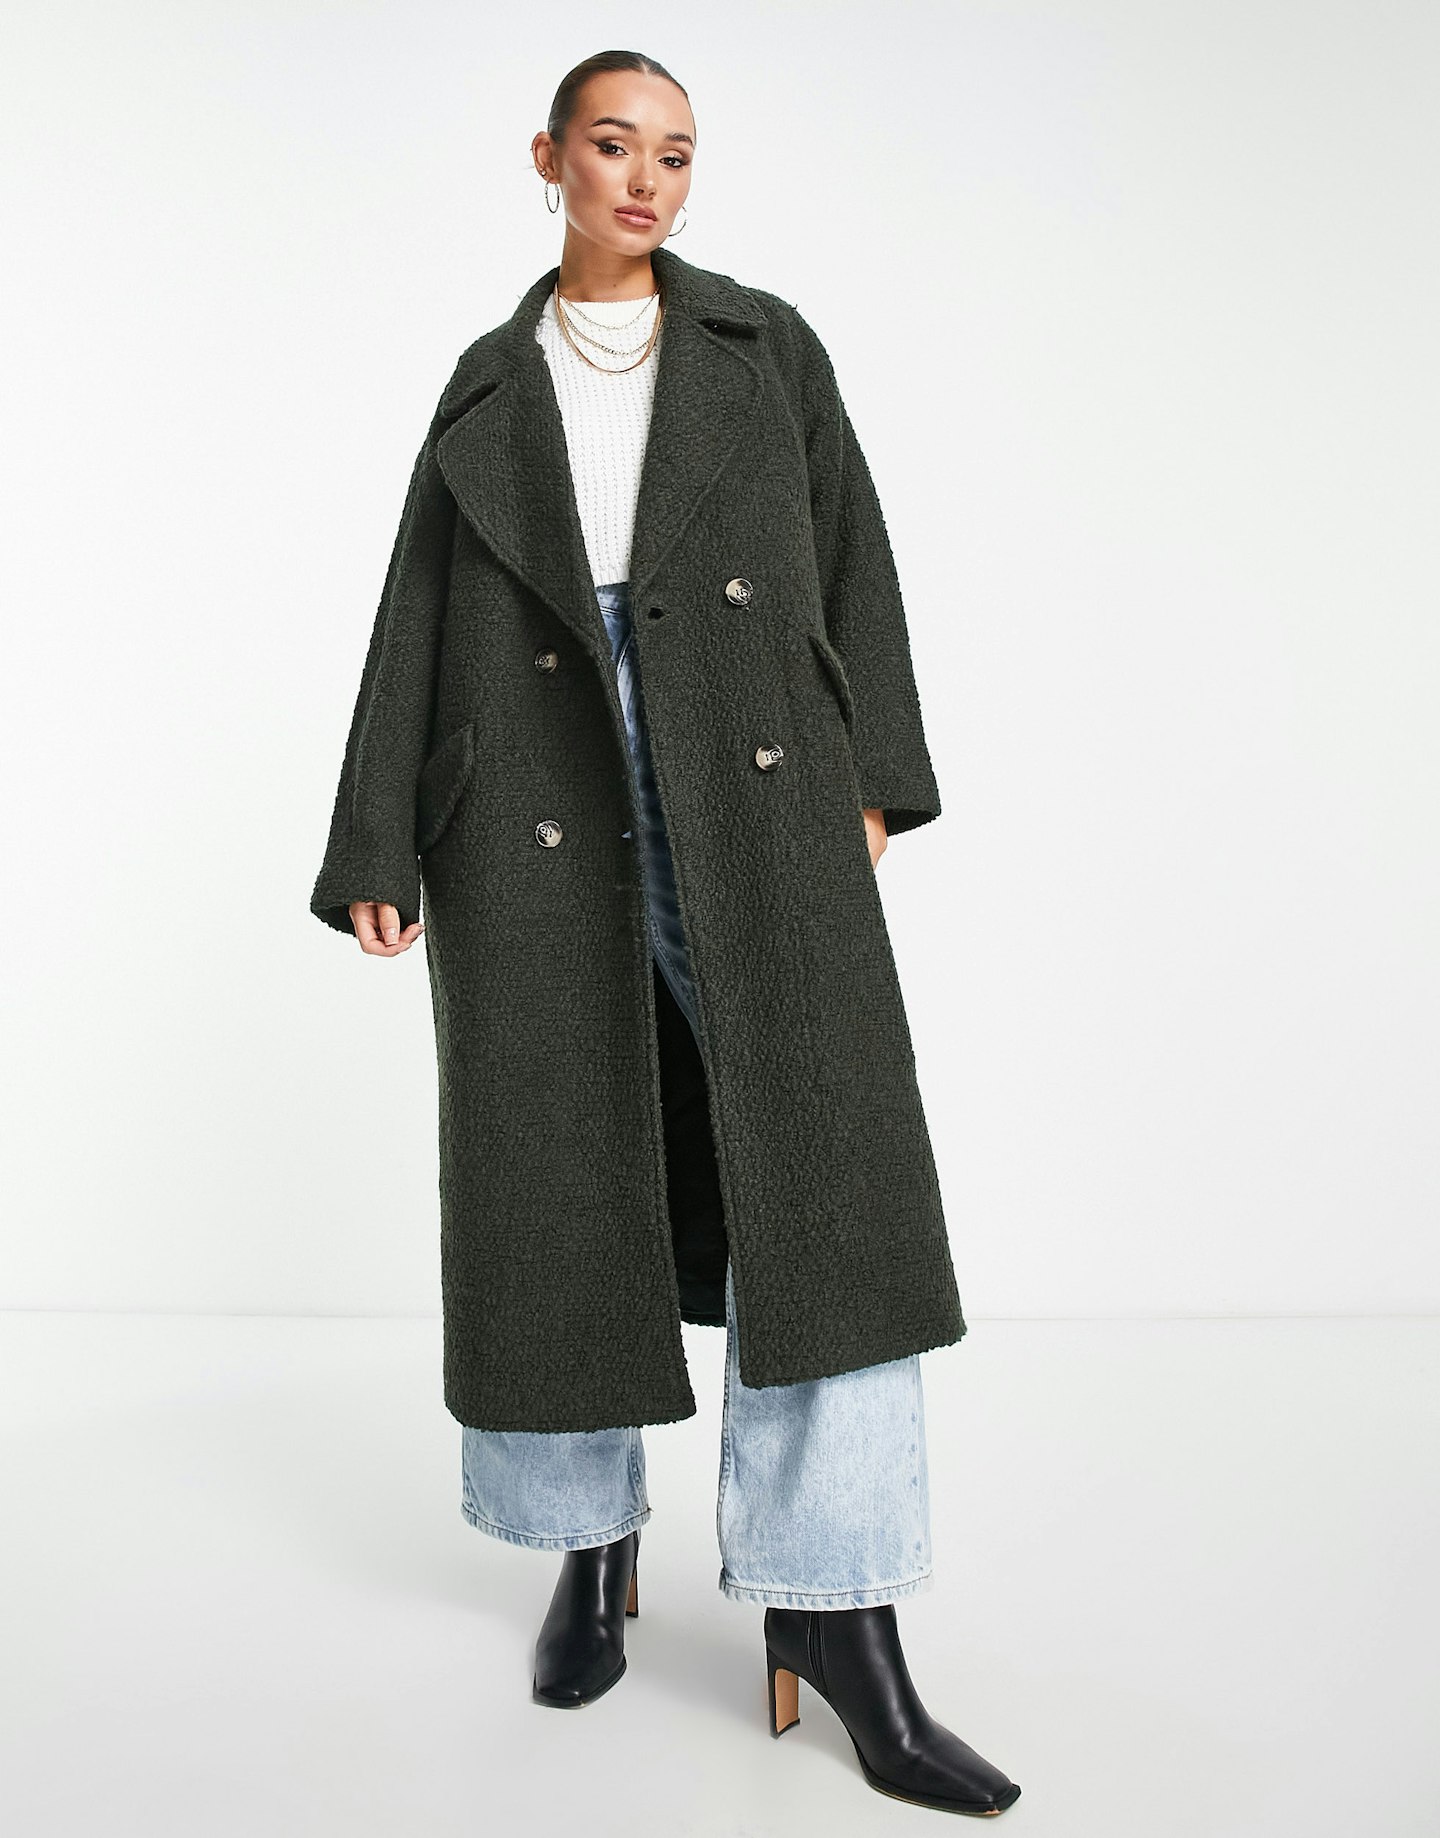 ASOS DESIGN smart double breasted boucle wool mix coat in khaki